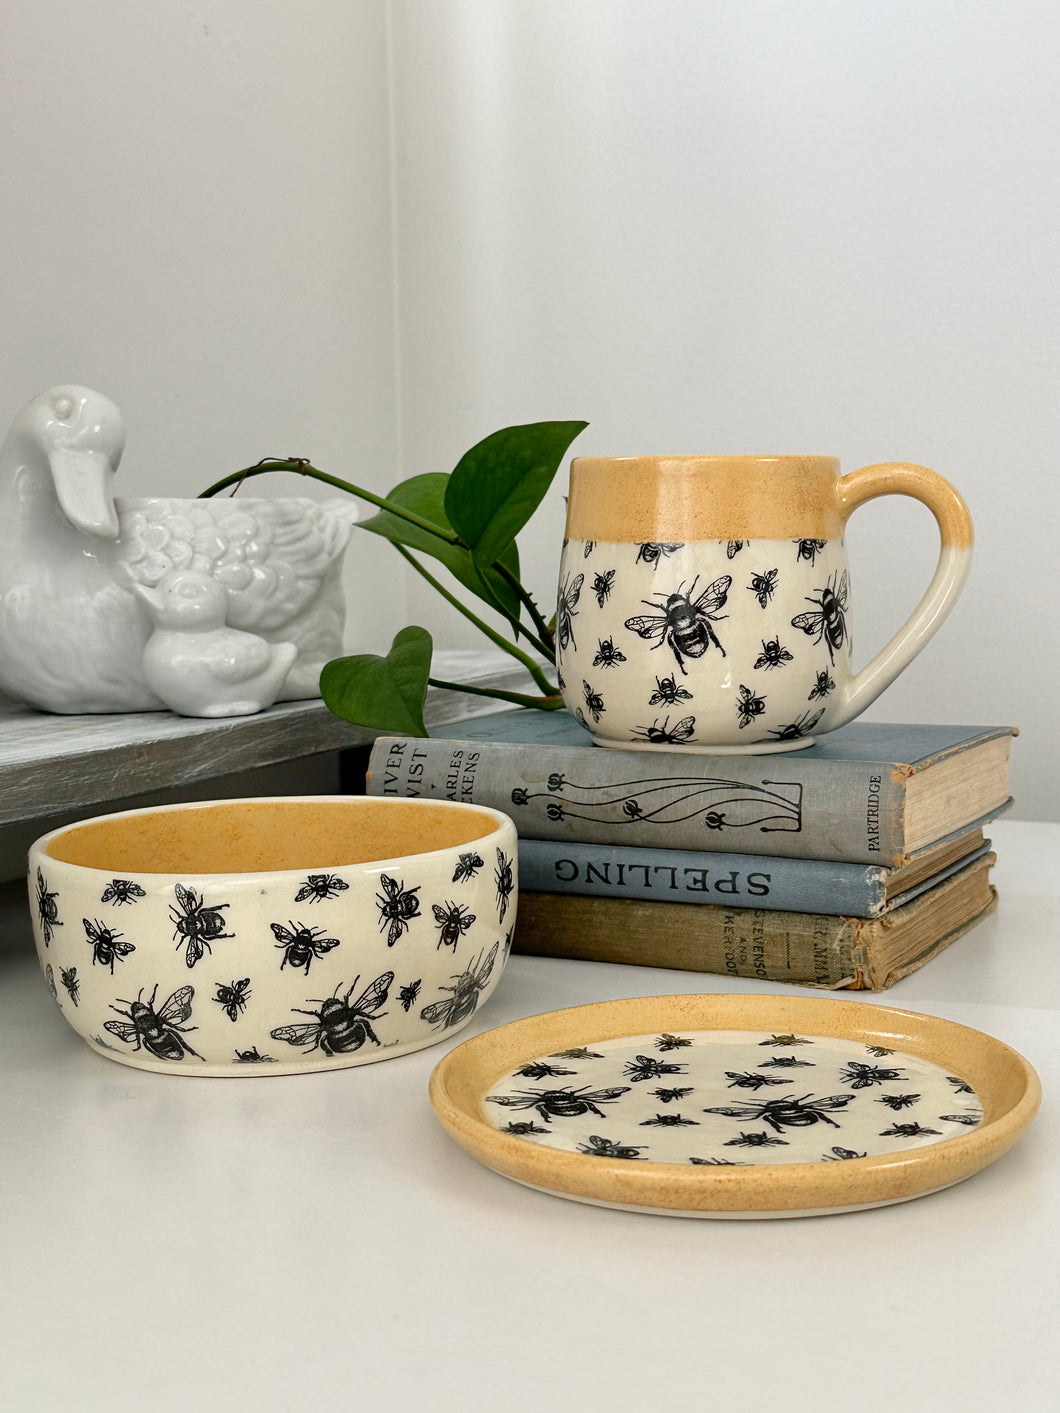 #015 - 3 piece set - Small snack plate, small dessert bowl, and 16 oz. mug with bee pattern and yellow rim. Dark blue inside the mug